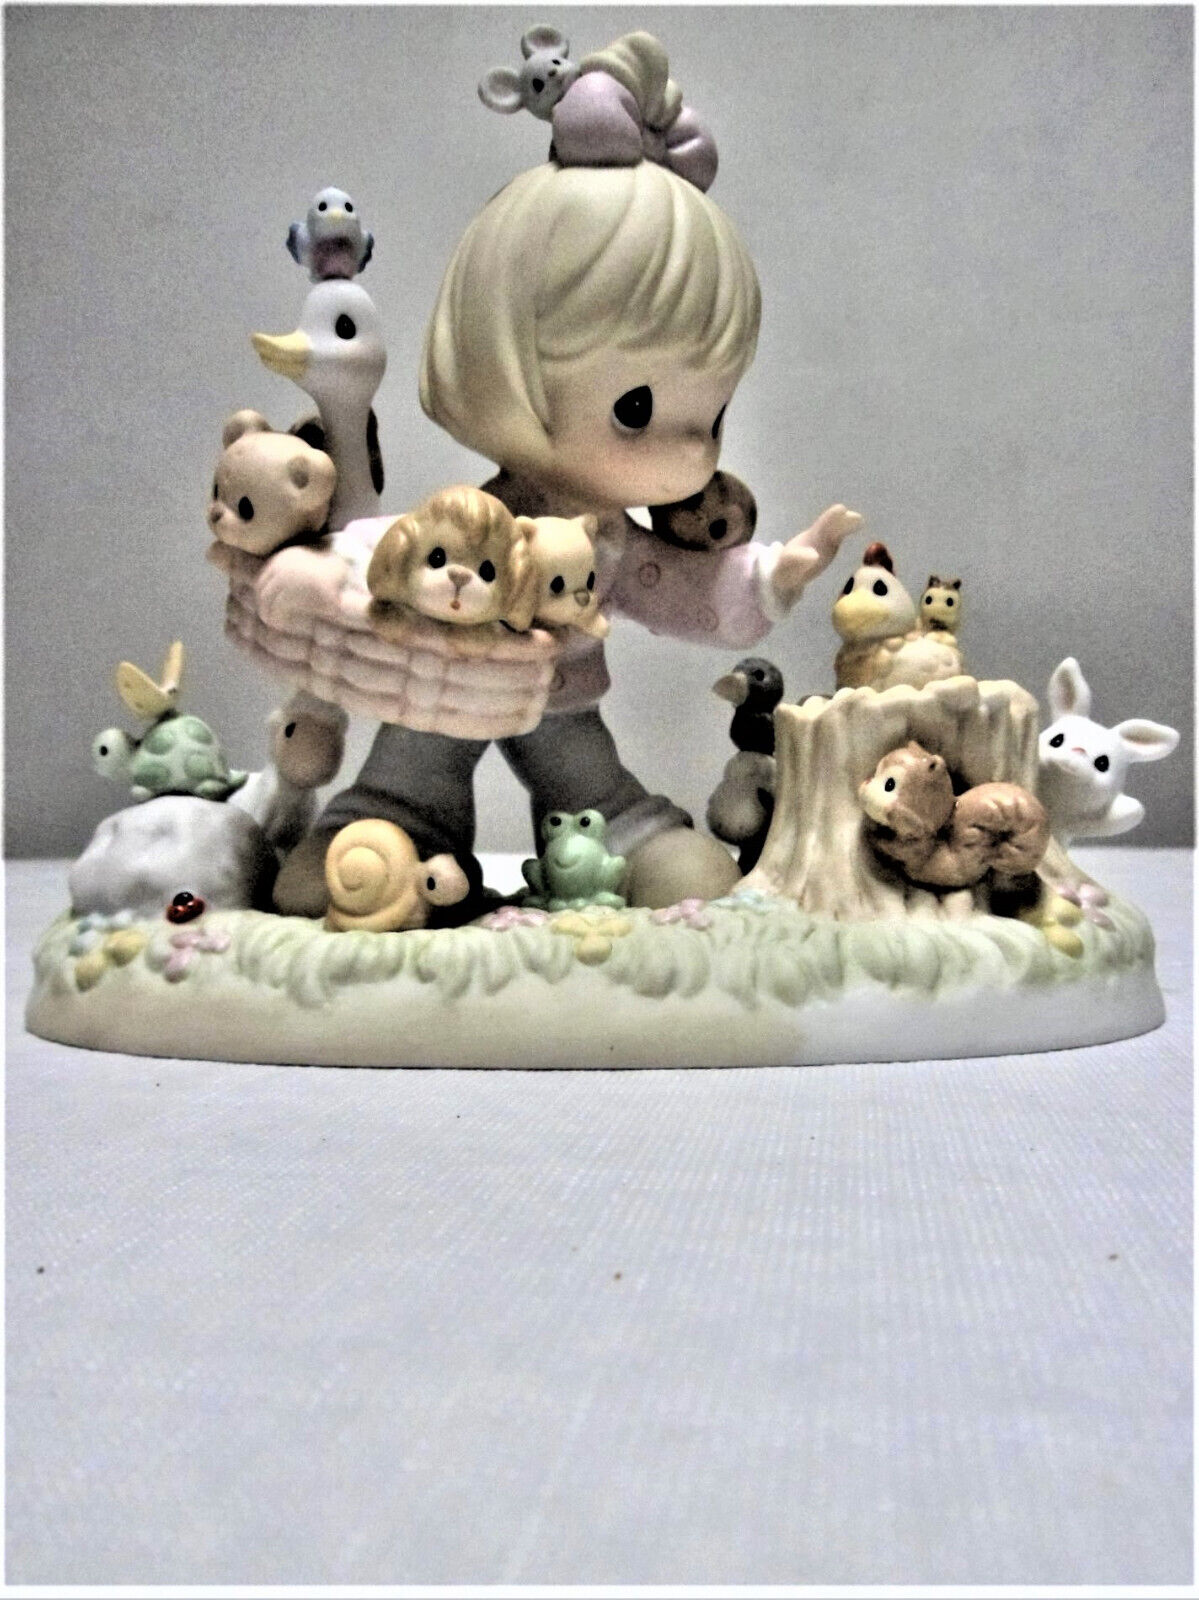 Precious Moments Figurine PM002- Collecting Friends Along The Way